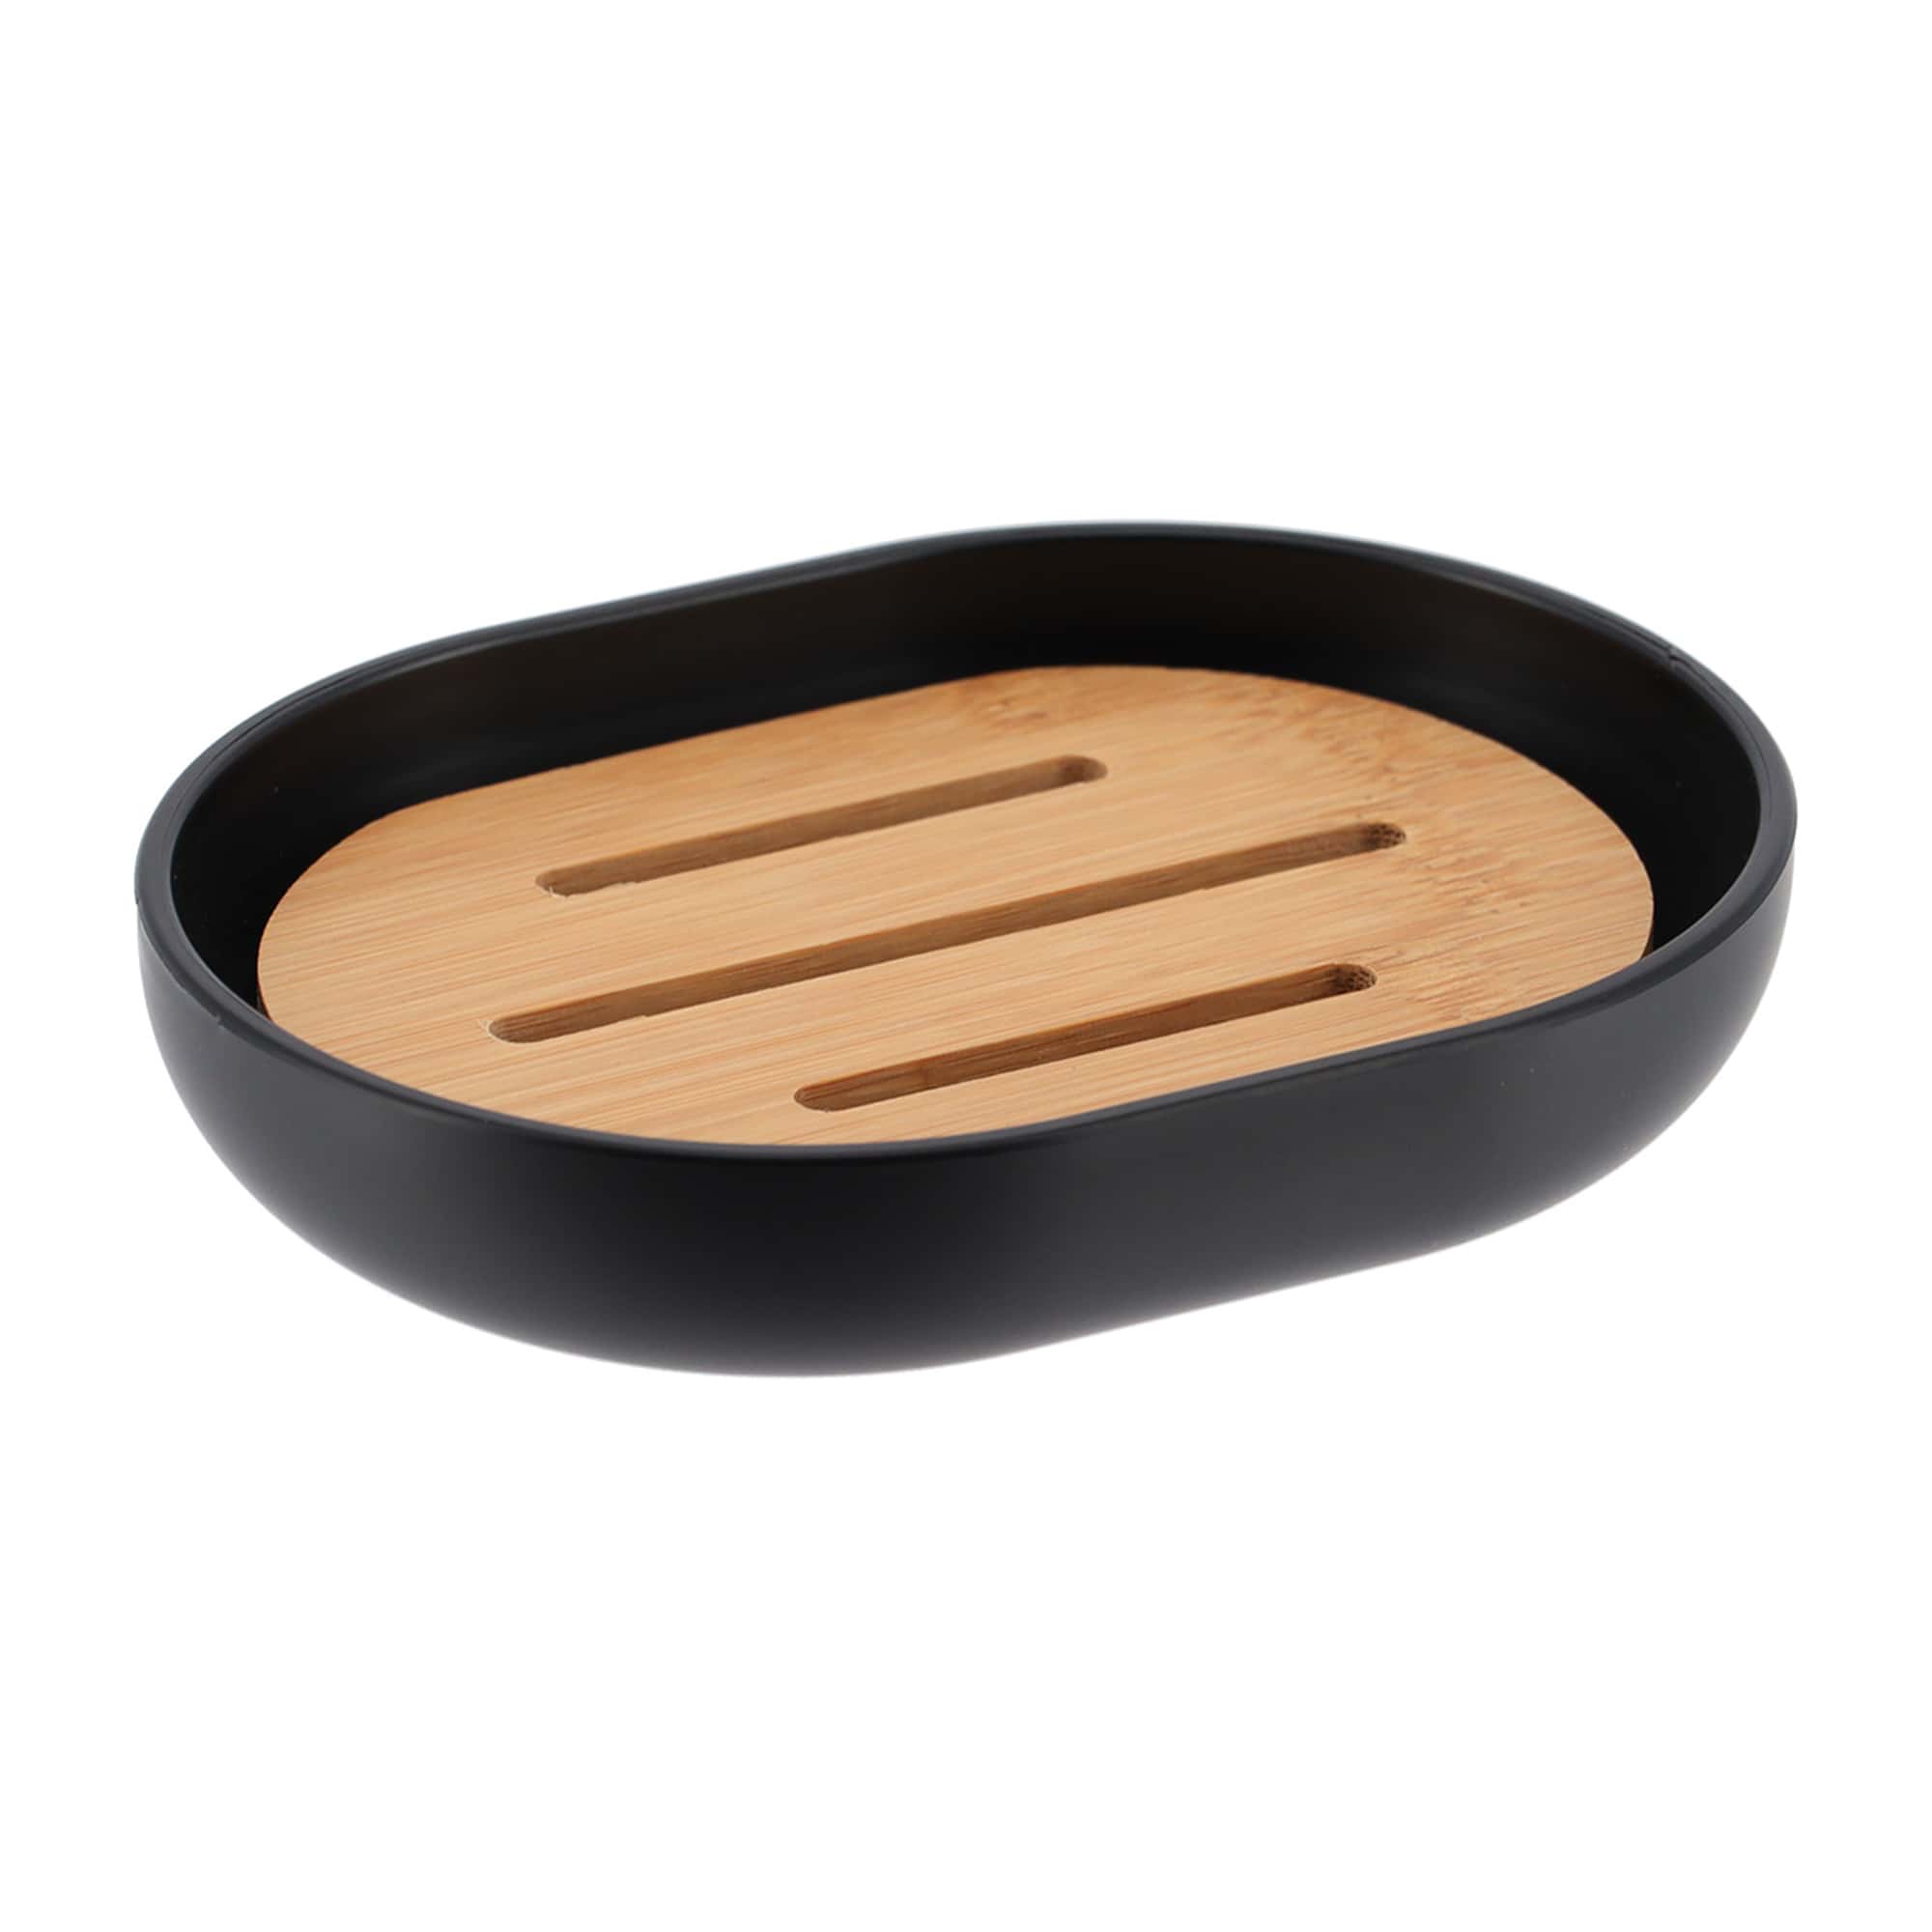 Refined organization - PADANG Premium Black Soap Dish & Bamboo Tray. Stylish bathroom storage for a touch of elegance in your space.